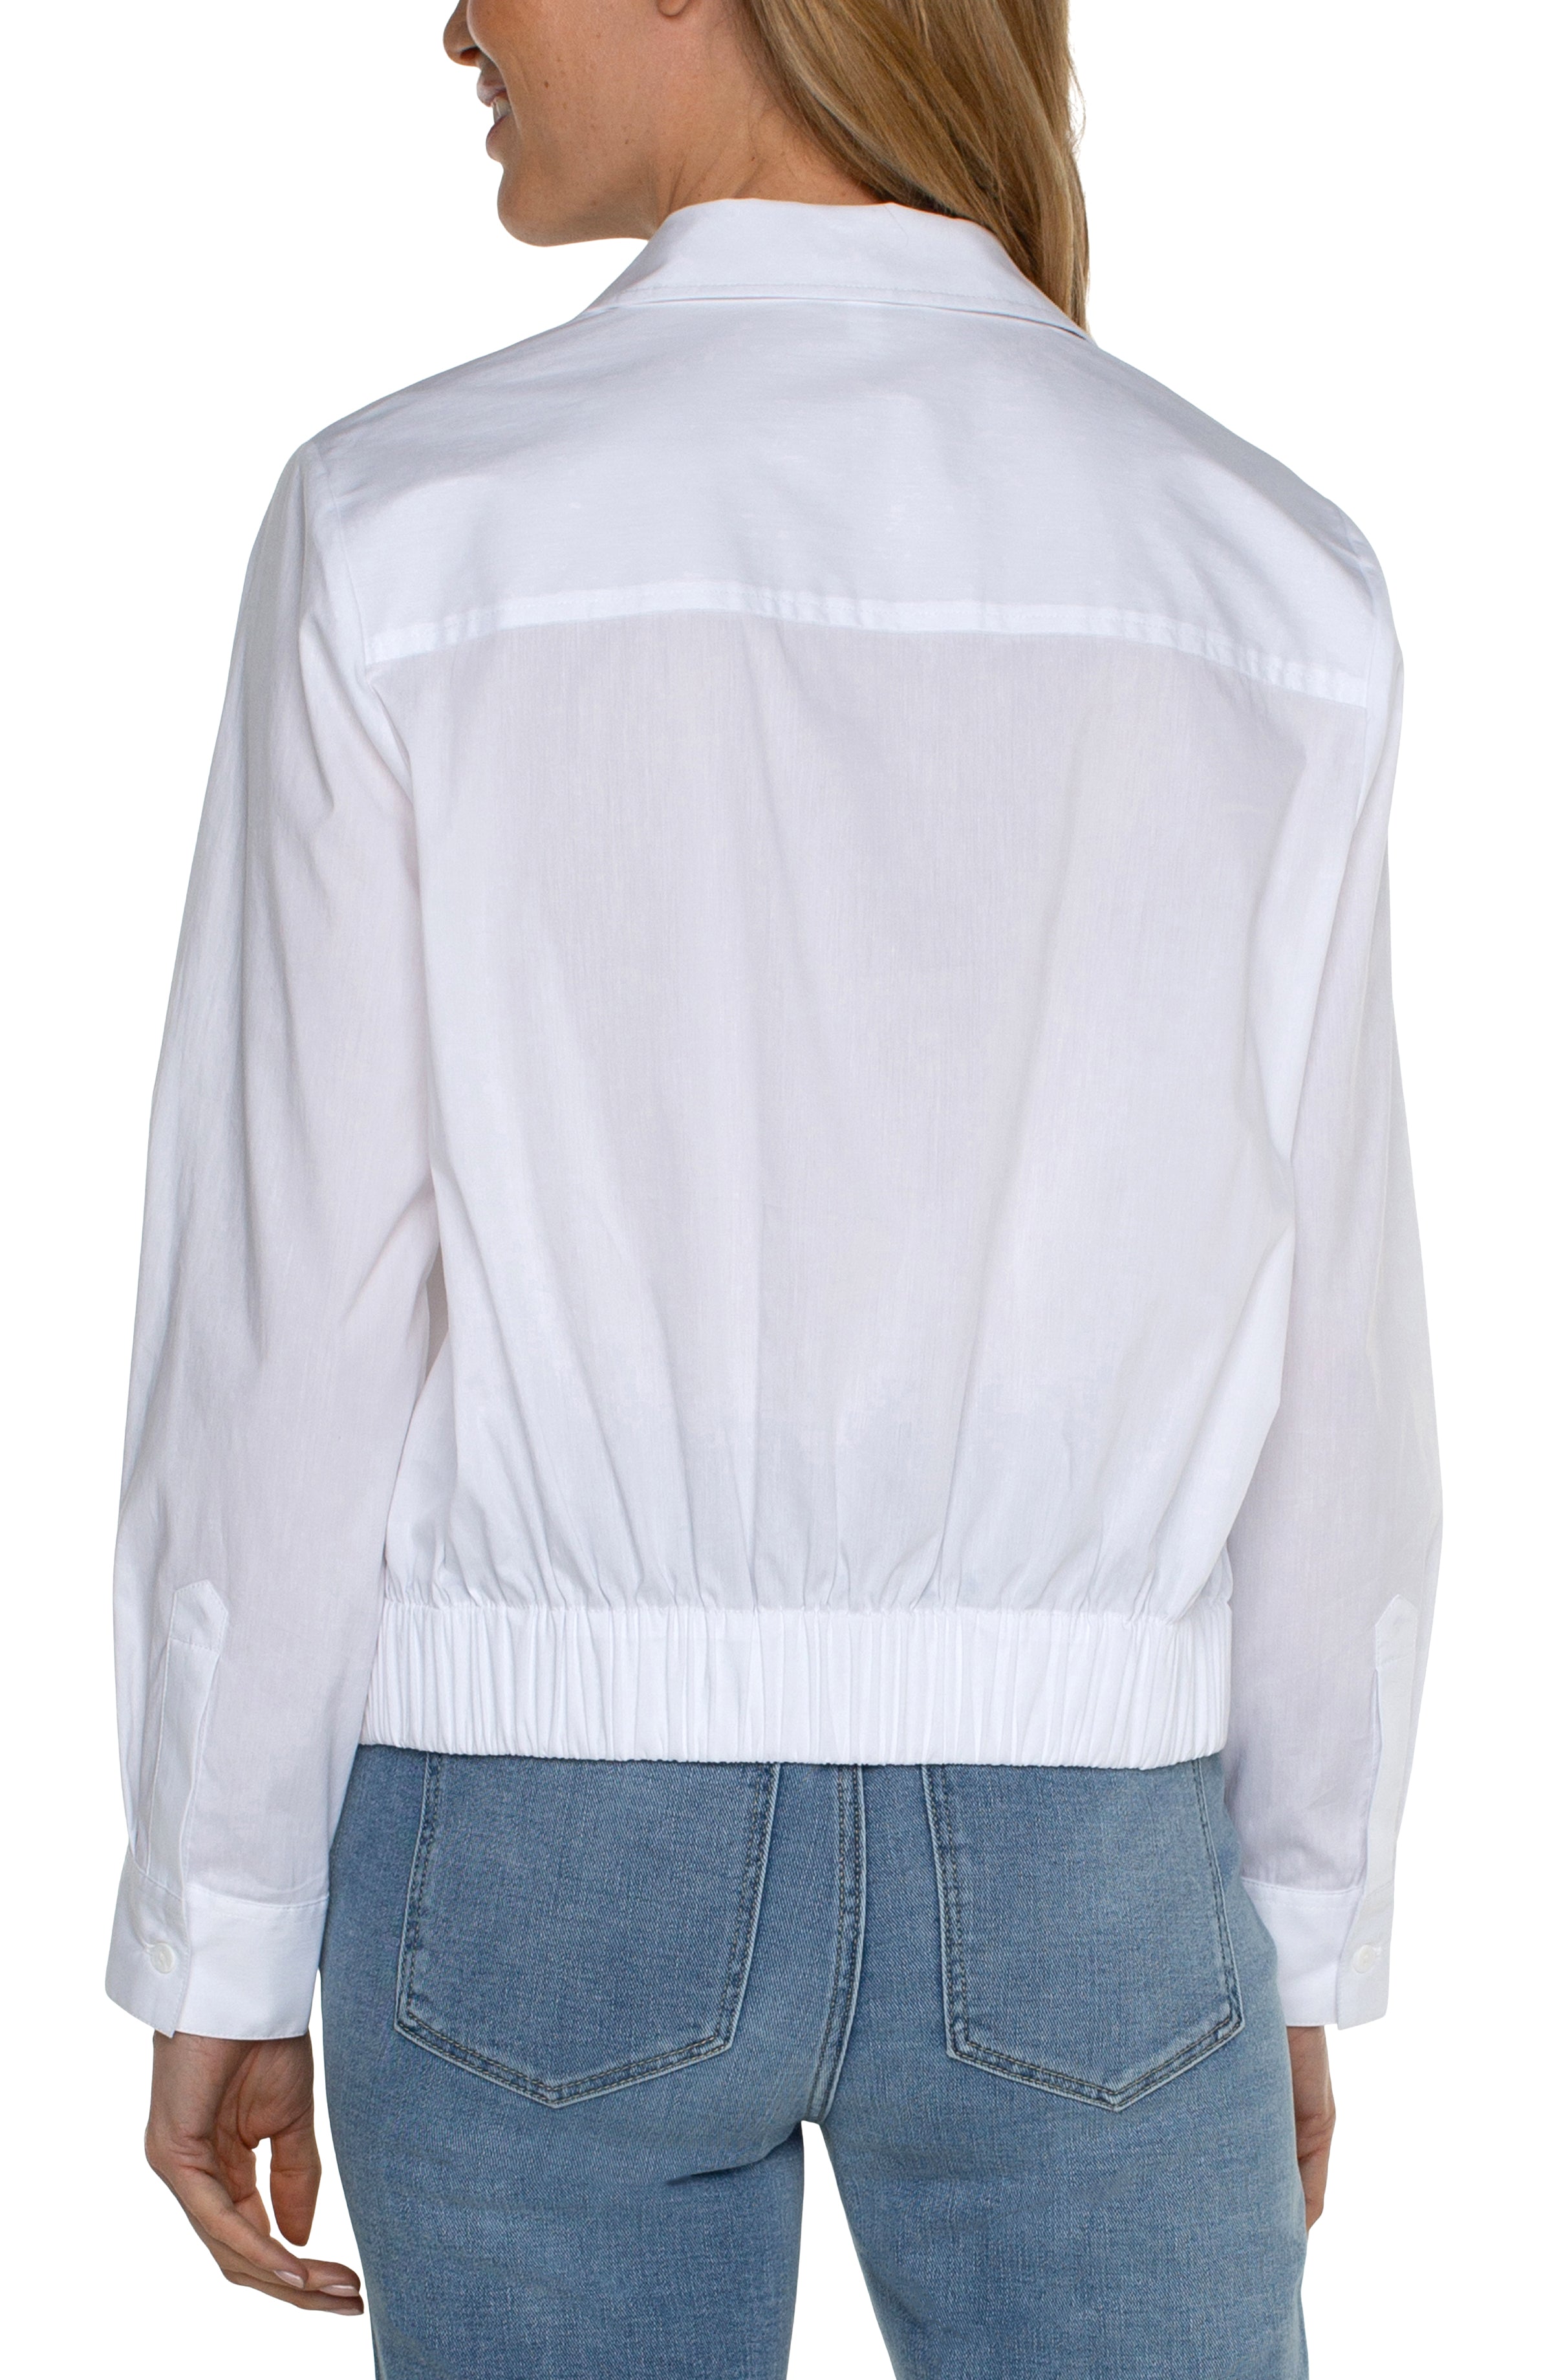 Liverpool Front Button Shirt with Elastic Waist - White Back View